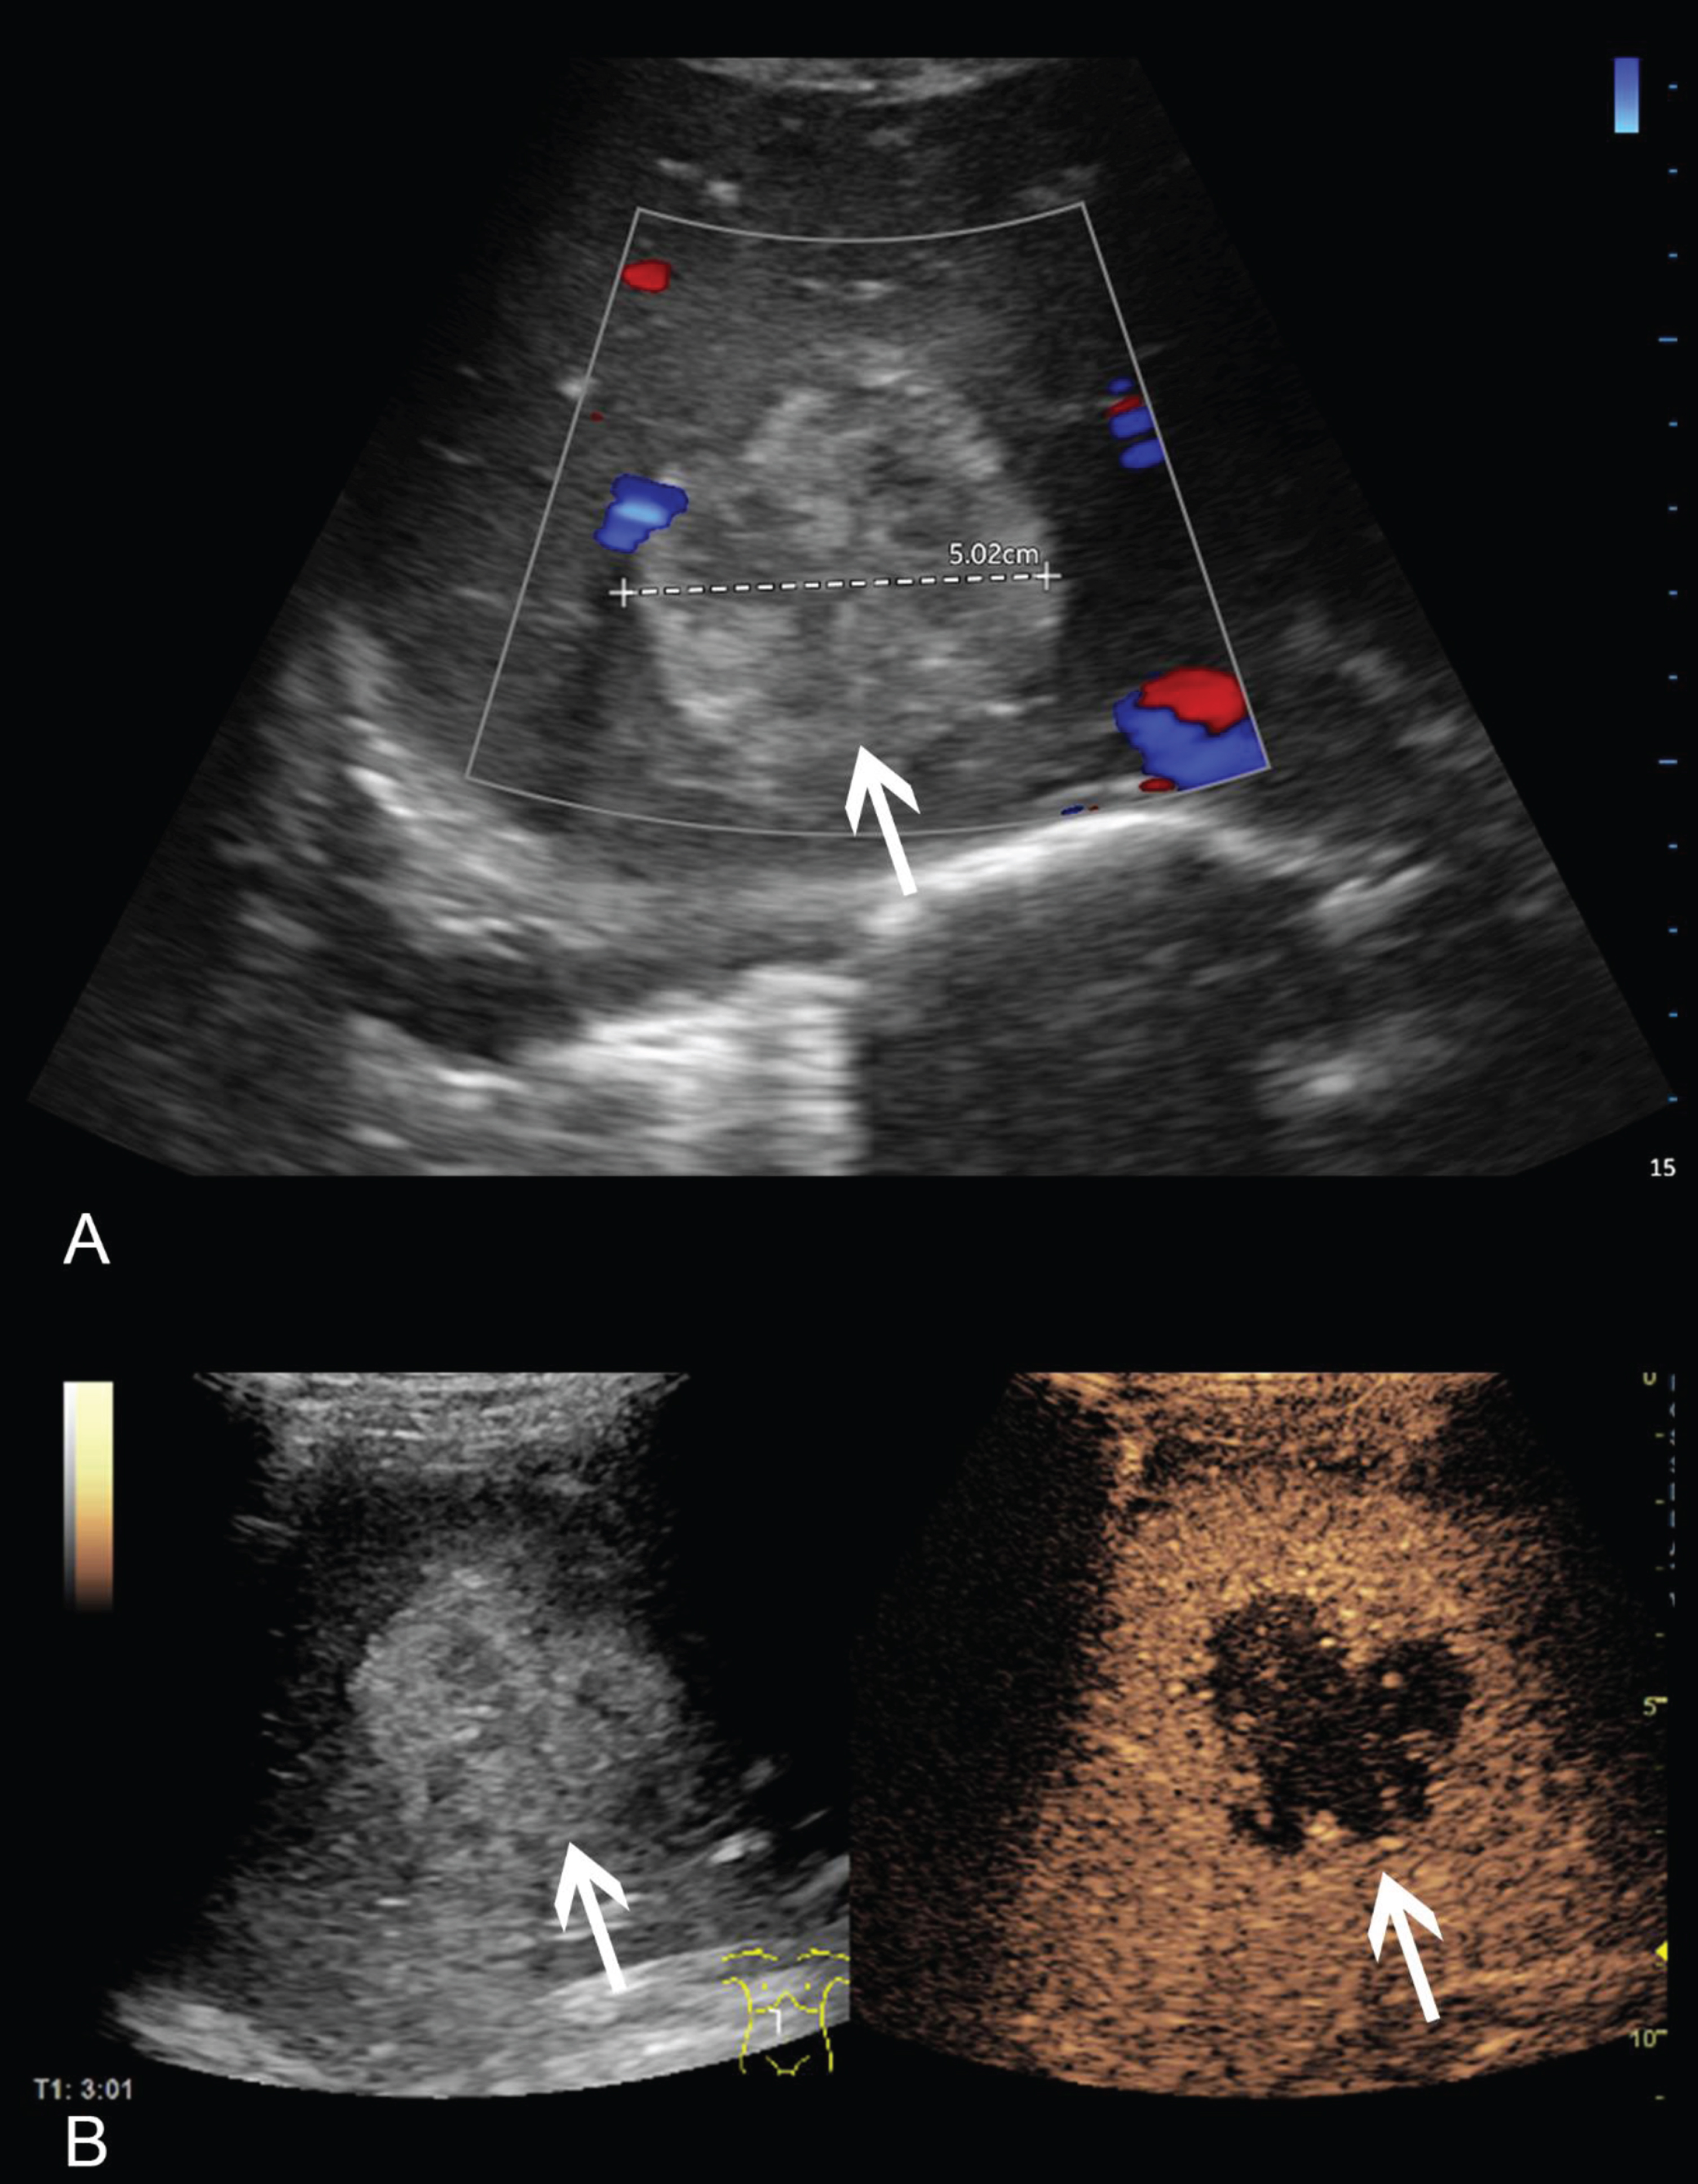 69 year old patient with newly diagnosed retroauricular malignant melanoma. A: Vscan ultrasound showed a 5 cm hyperechogenic hepatic lesion with no relevant perfusion on CCDS. Image quality was rated as 3 altogether. B: High-resolution ultrasound confirmed this lesion. CEUS revealed a typical nodular centripetal enhancement, consistent with a partially thrombosed hemangioma. Image quality was rated as excellent (4). Pathologies are marked with an arrow.